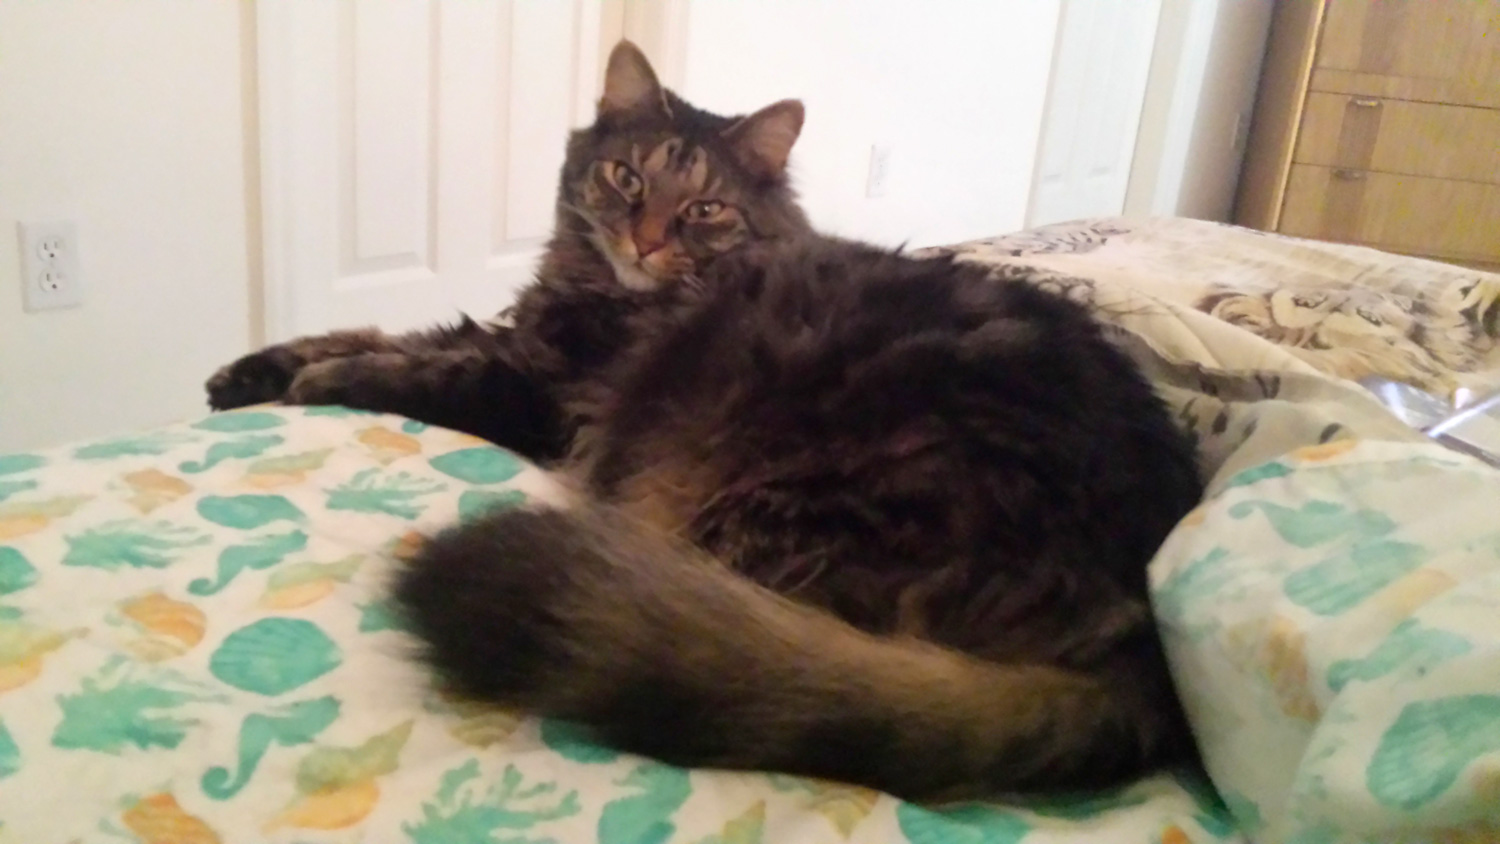 Darla H. in Punta Gorda, FL sent a picture of her cuddle boy, her beautiful brown, long-haired cat, Sneaky Pete. 